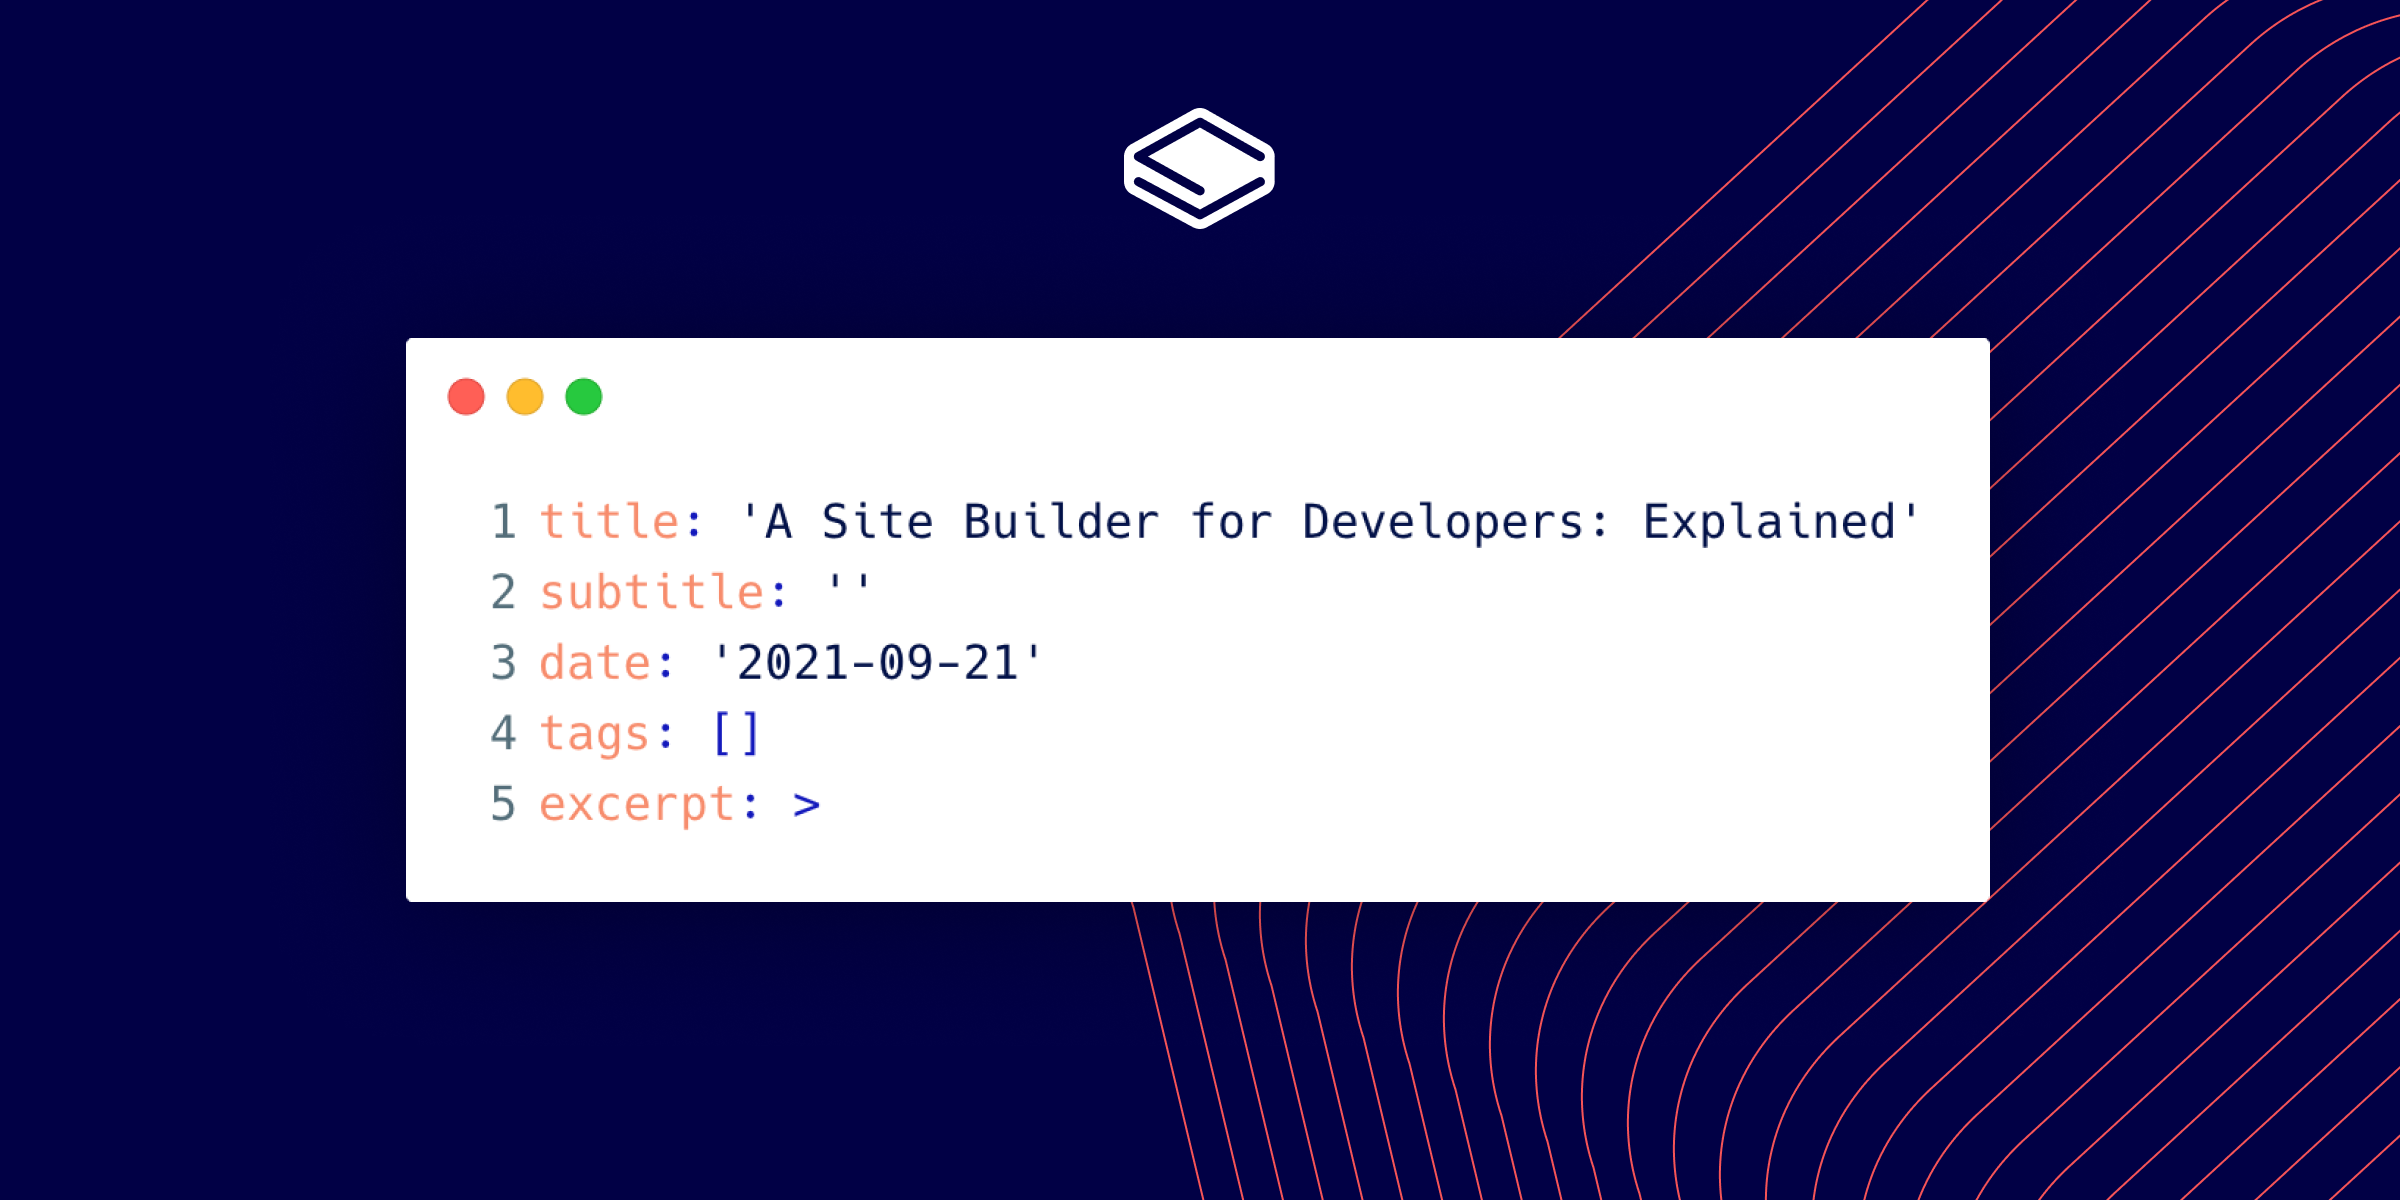 A Site Builder for Developers: Explained